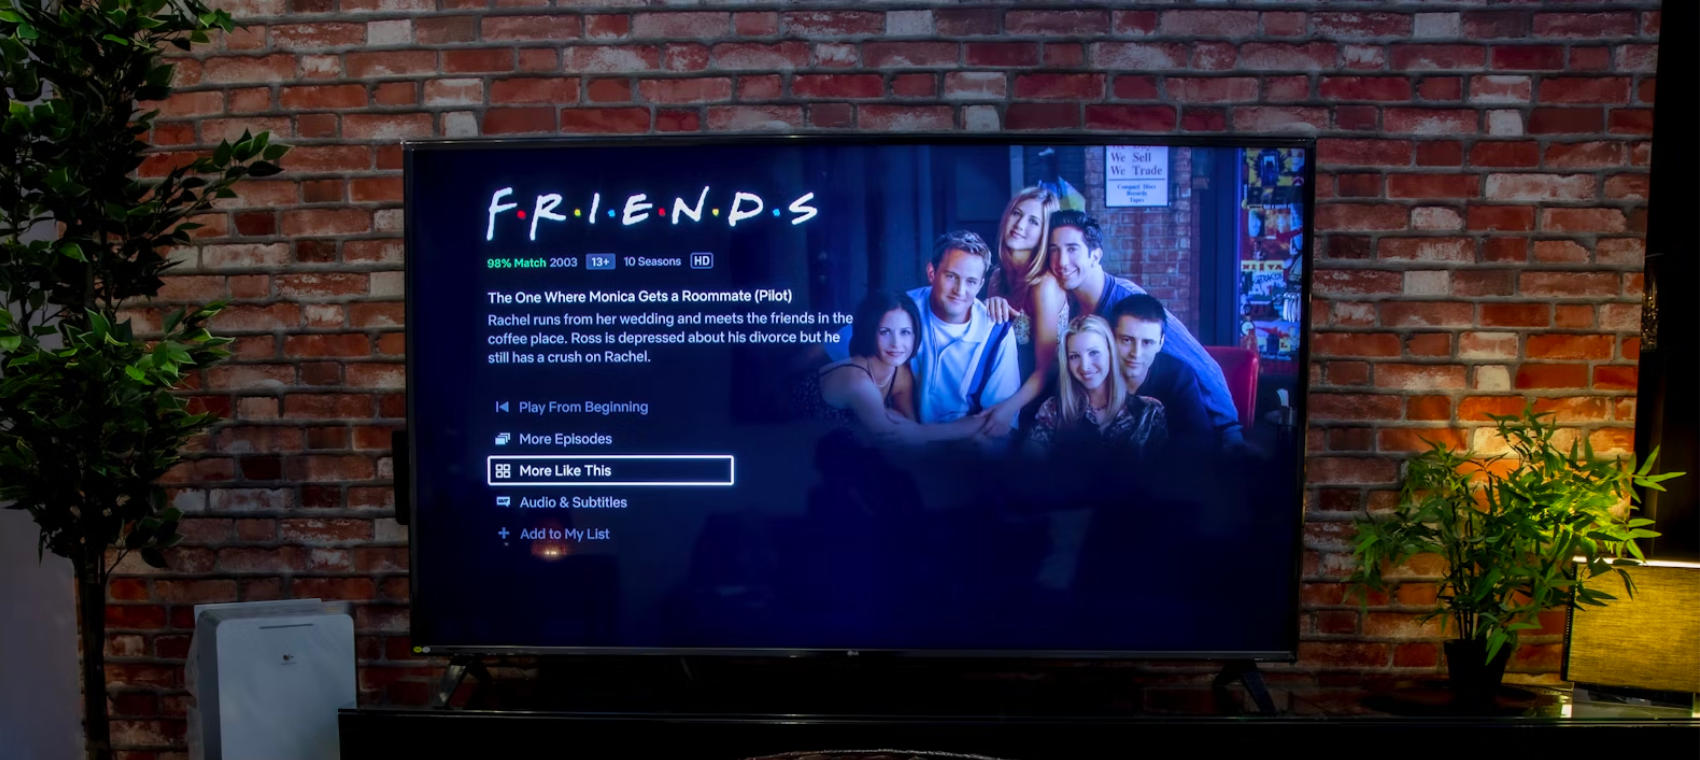 A decisive blow: How Netflix won the streaming wars